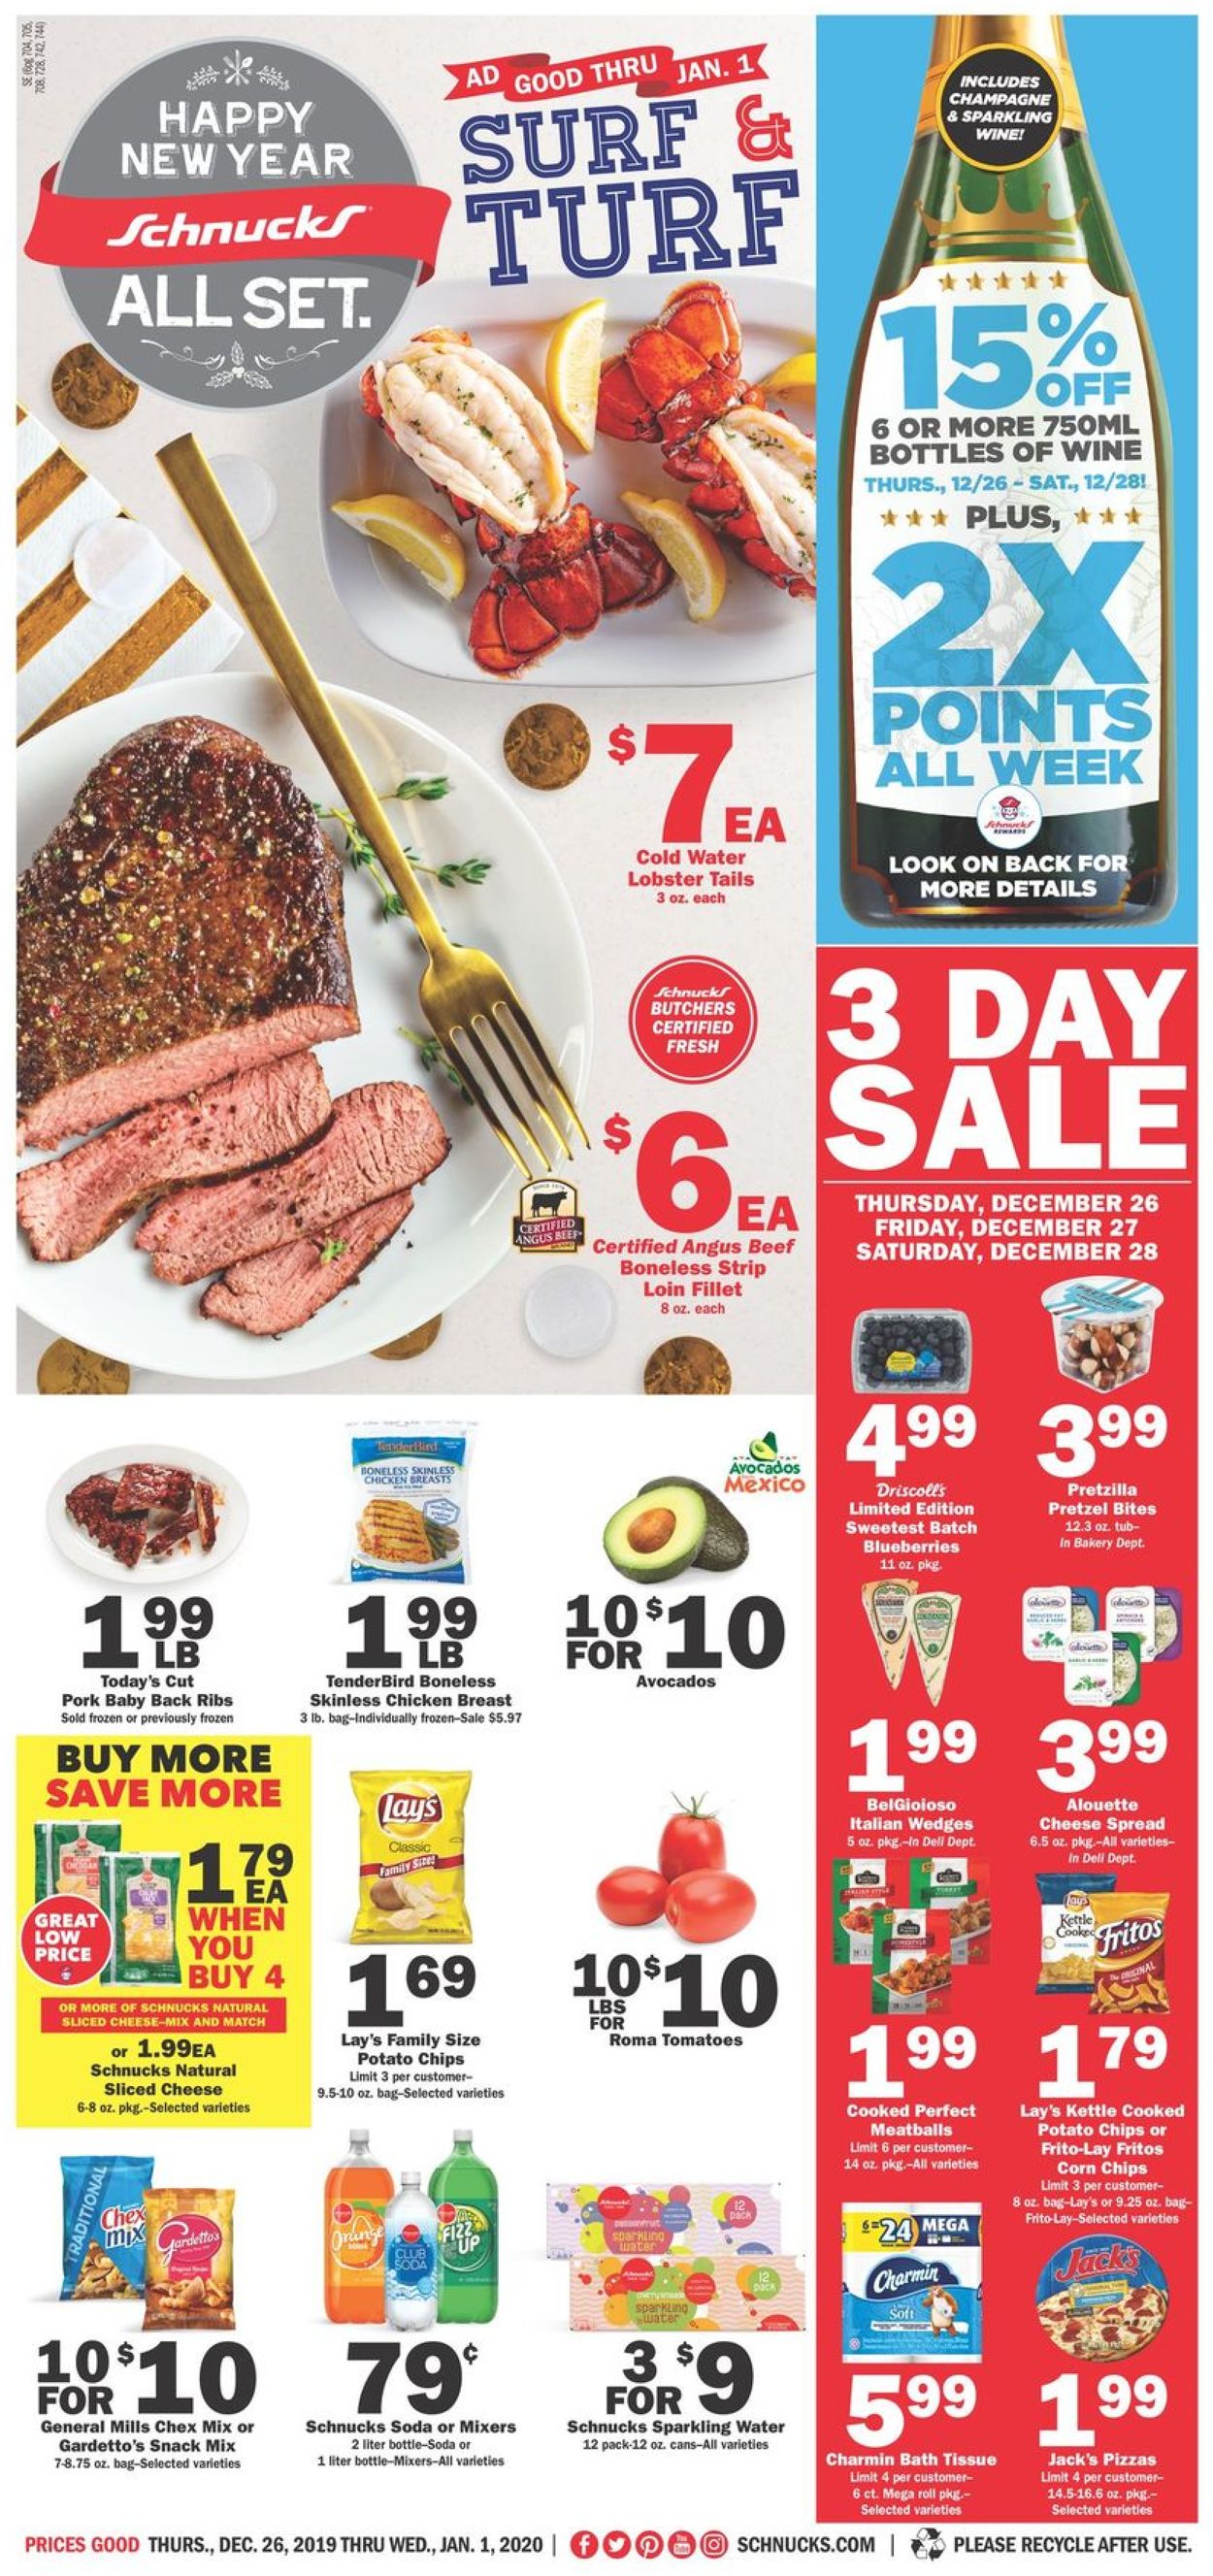 Schnucks New Year's Ad 2019/2020 Current weekly ad 12/26 01/01/2020